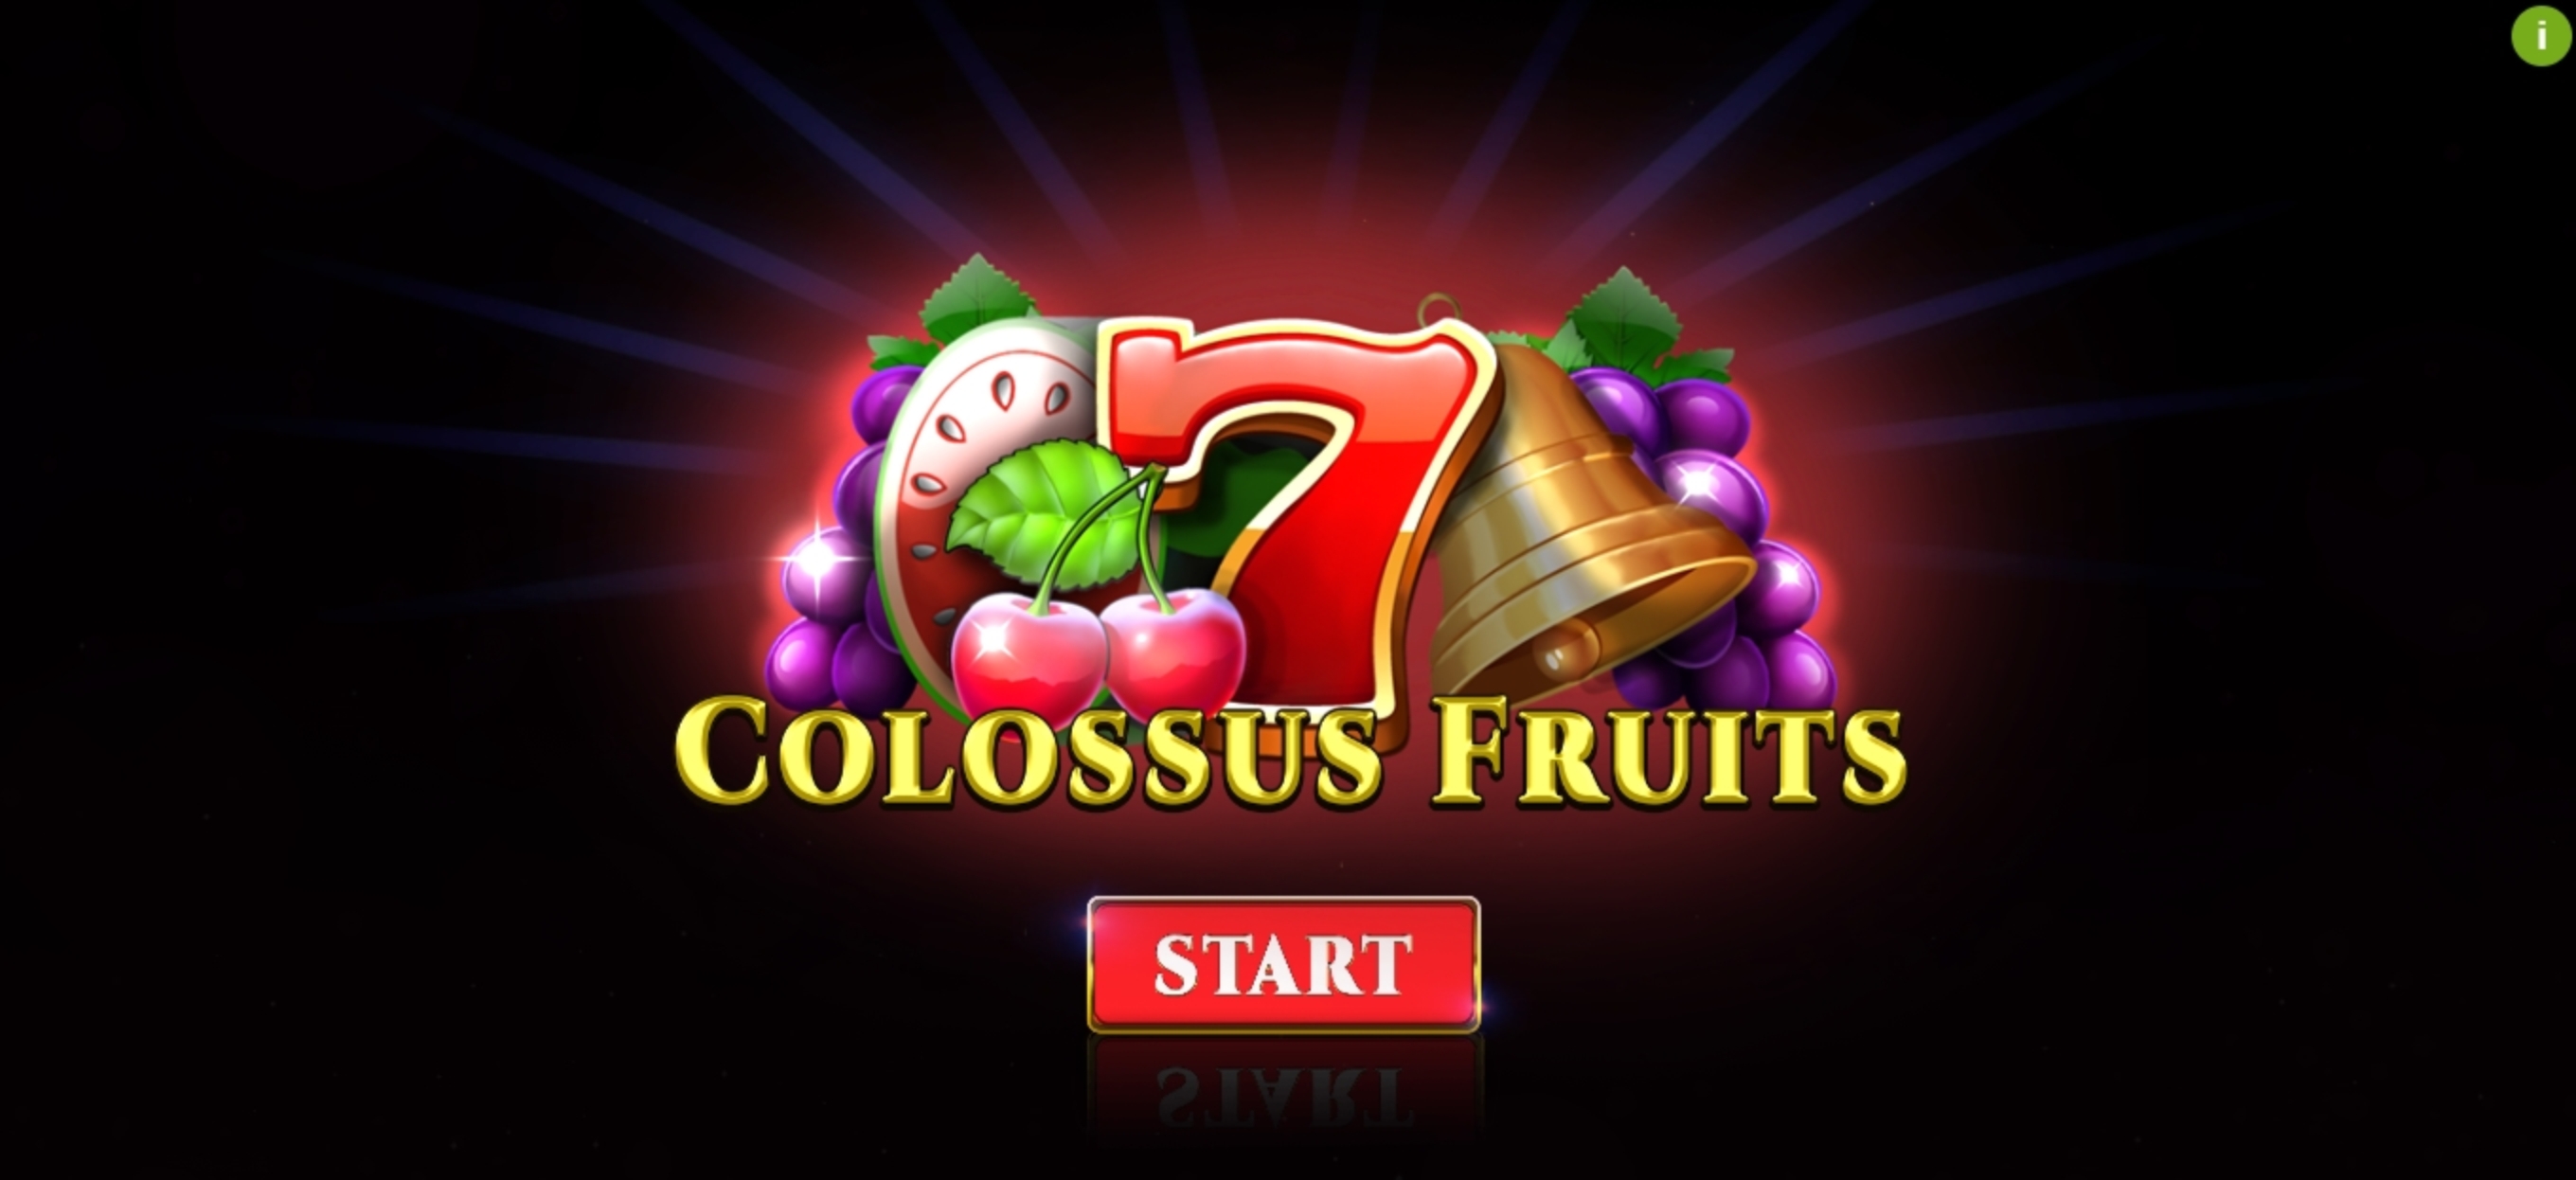 Play Colossus Fruits Easter Edition Free Casino Slot Game by Spinomenal